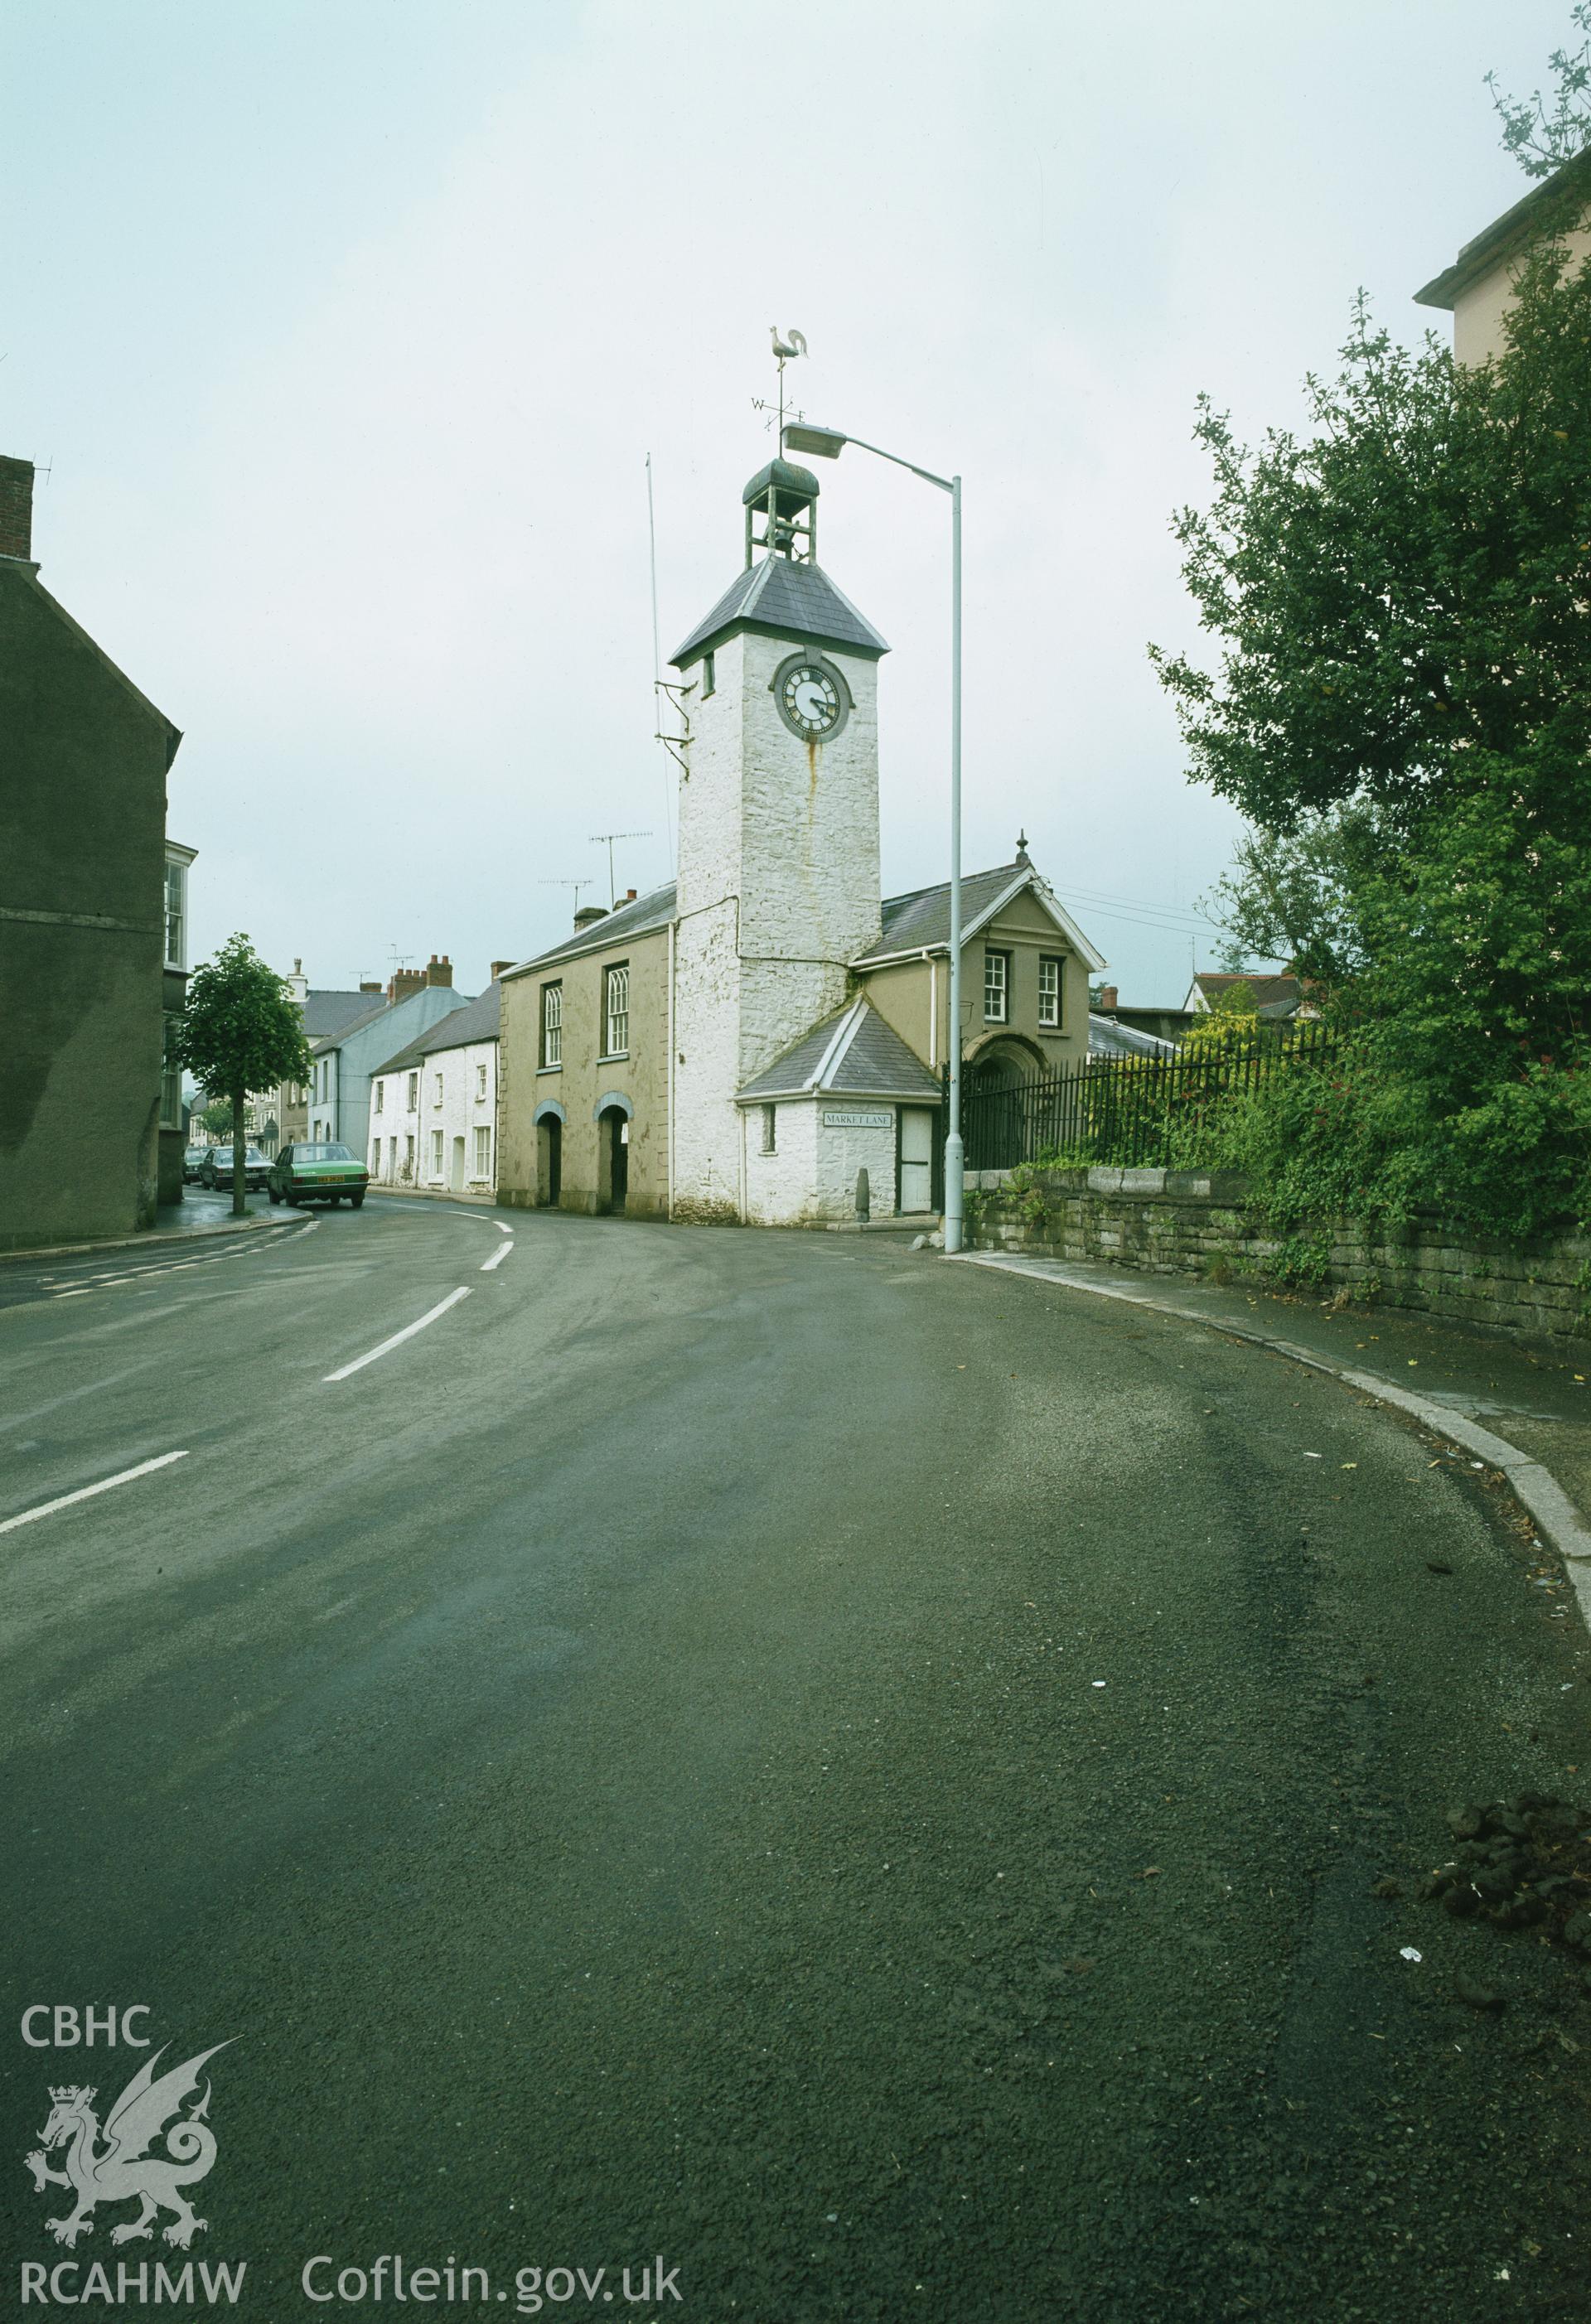 RCAHMW colour transparency of Laugharne Town Hall, taken by Iain Wright, 1979